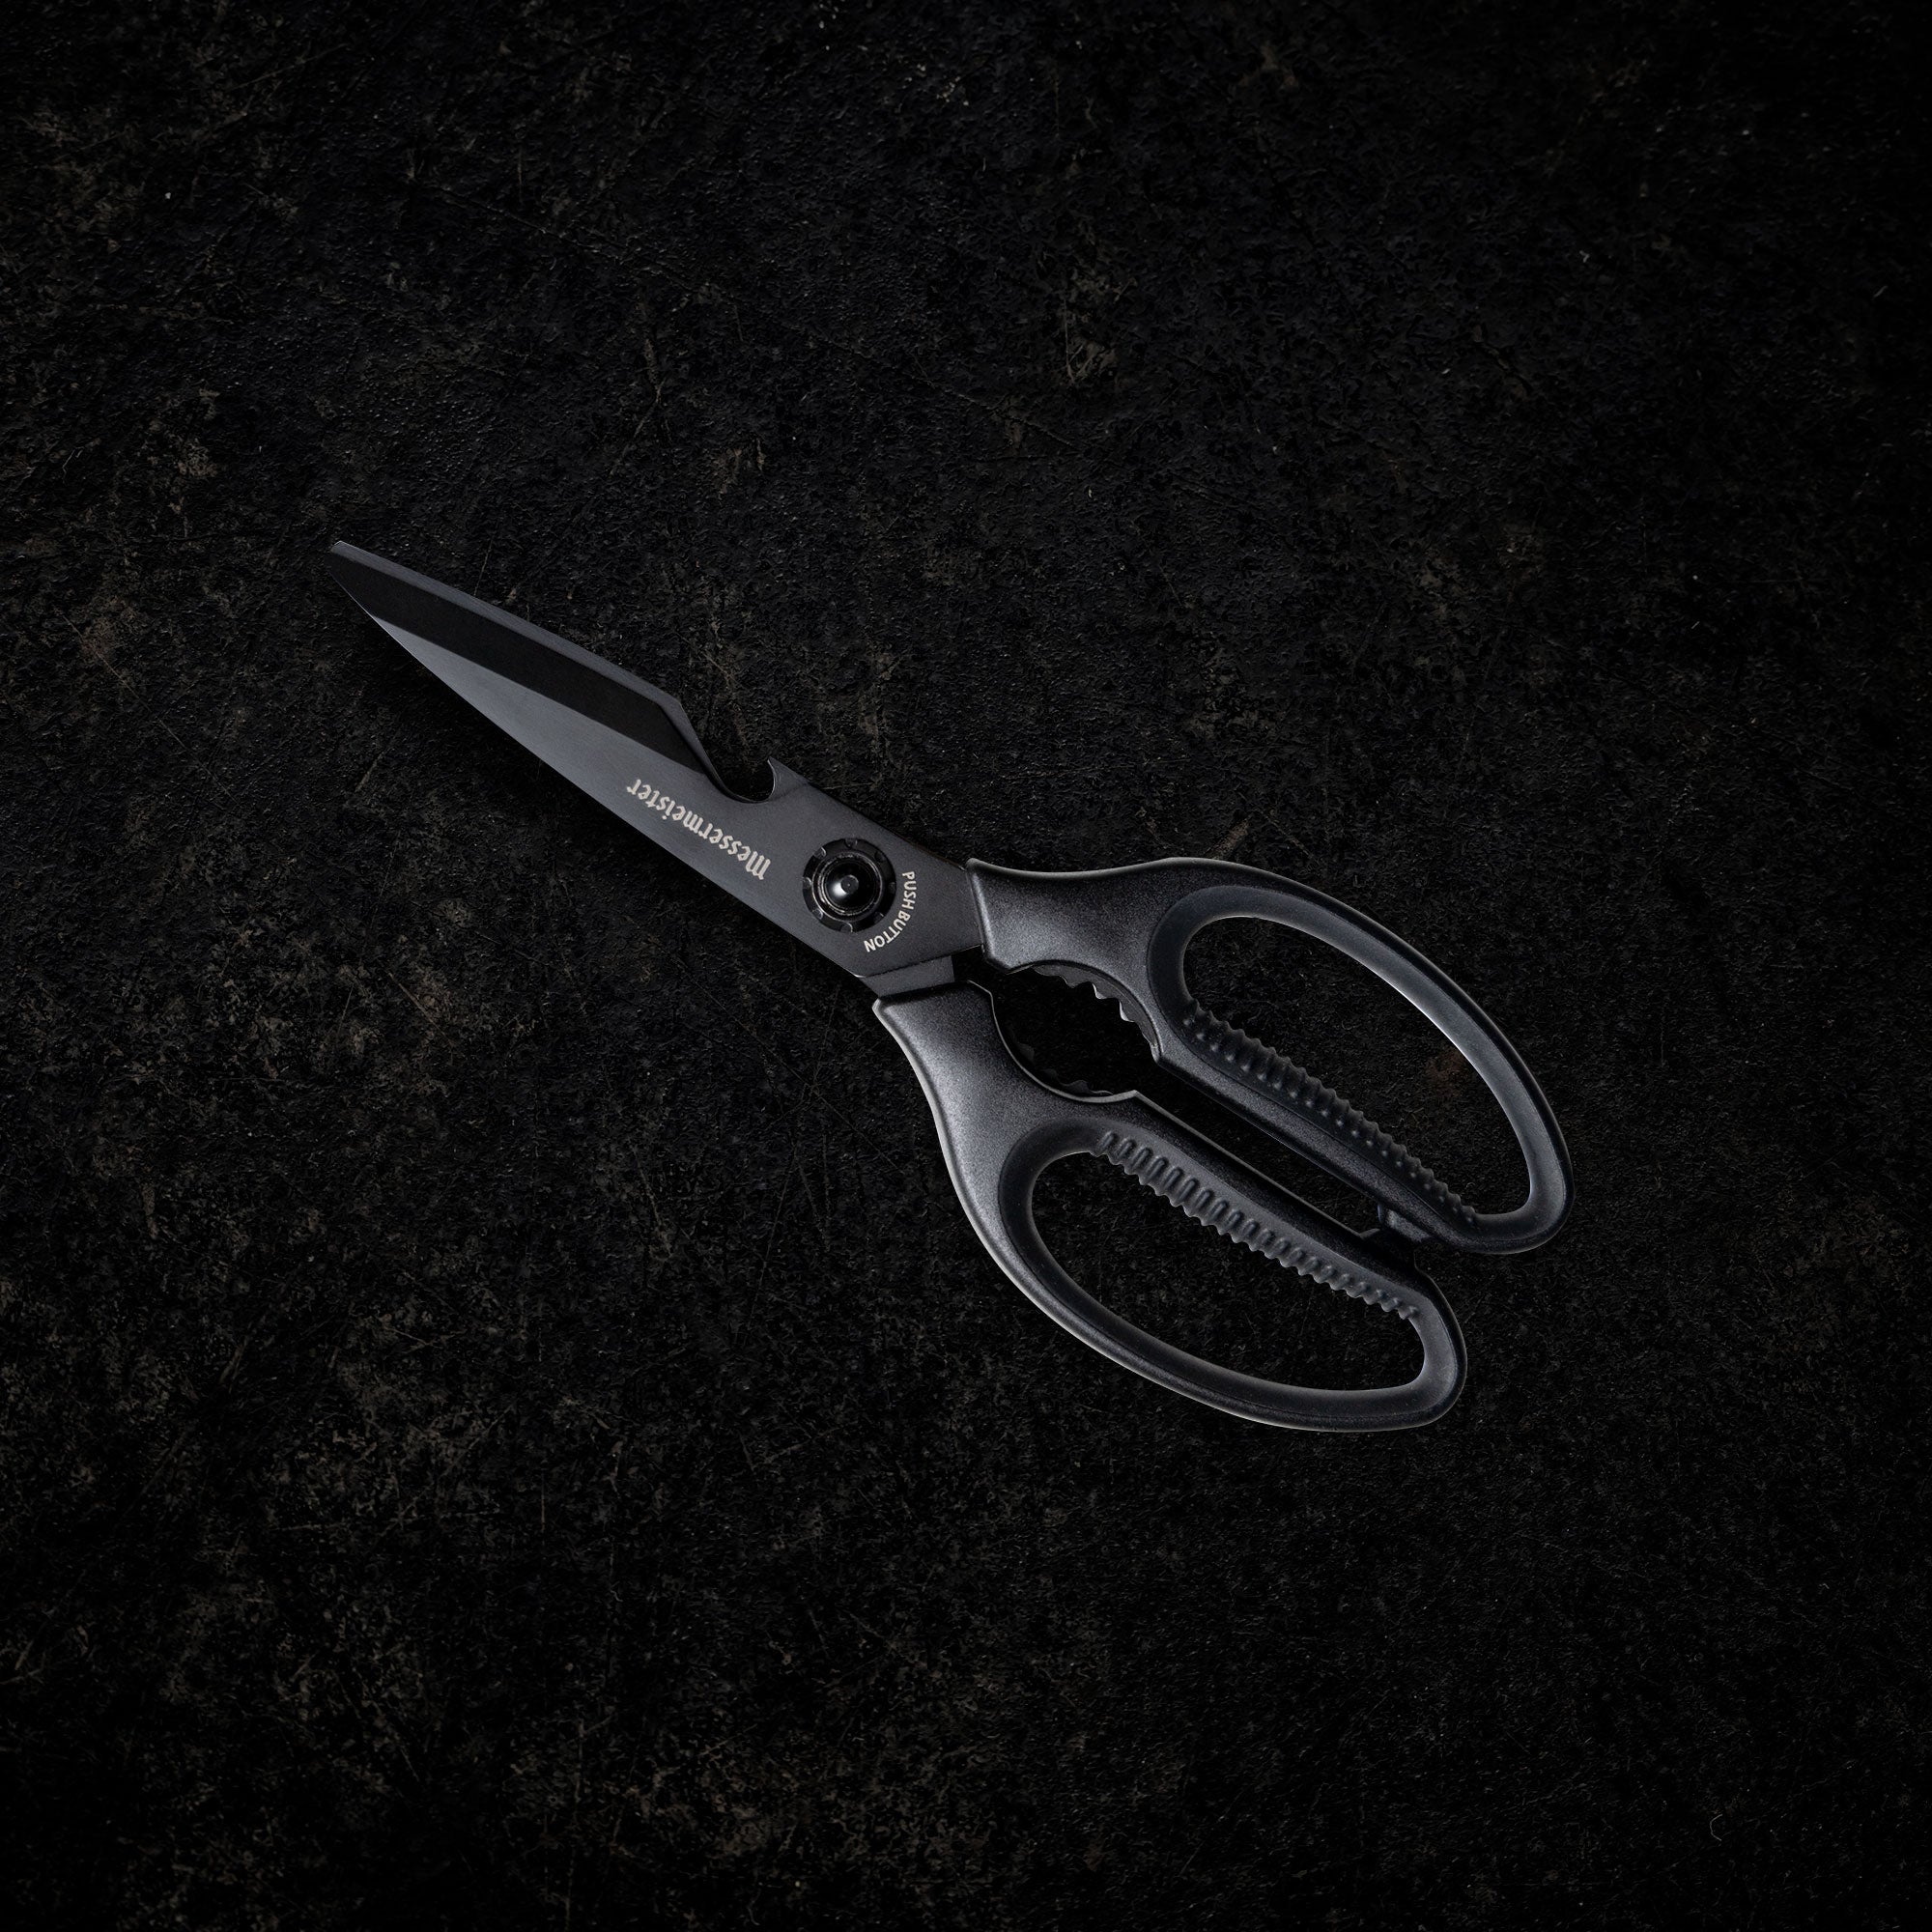 Kitchen Scissors: Patented Take-Apart Stainless Steel Utility